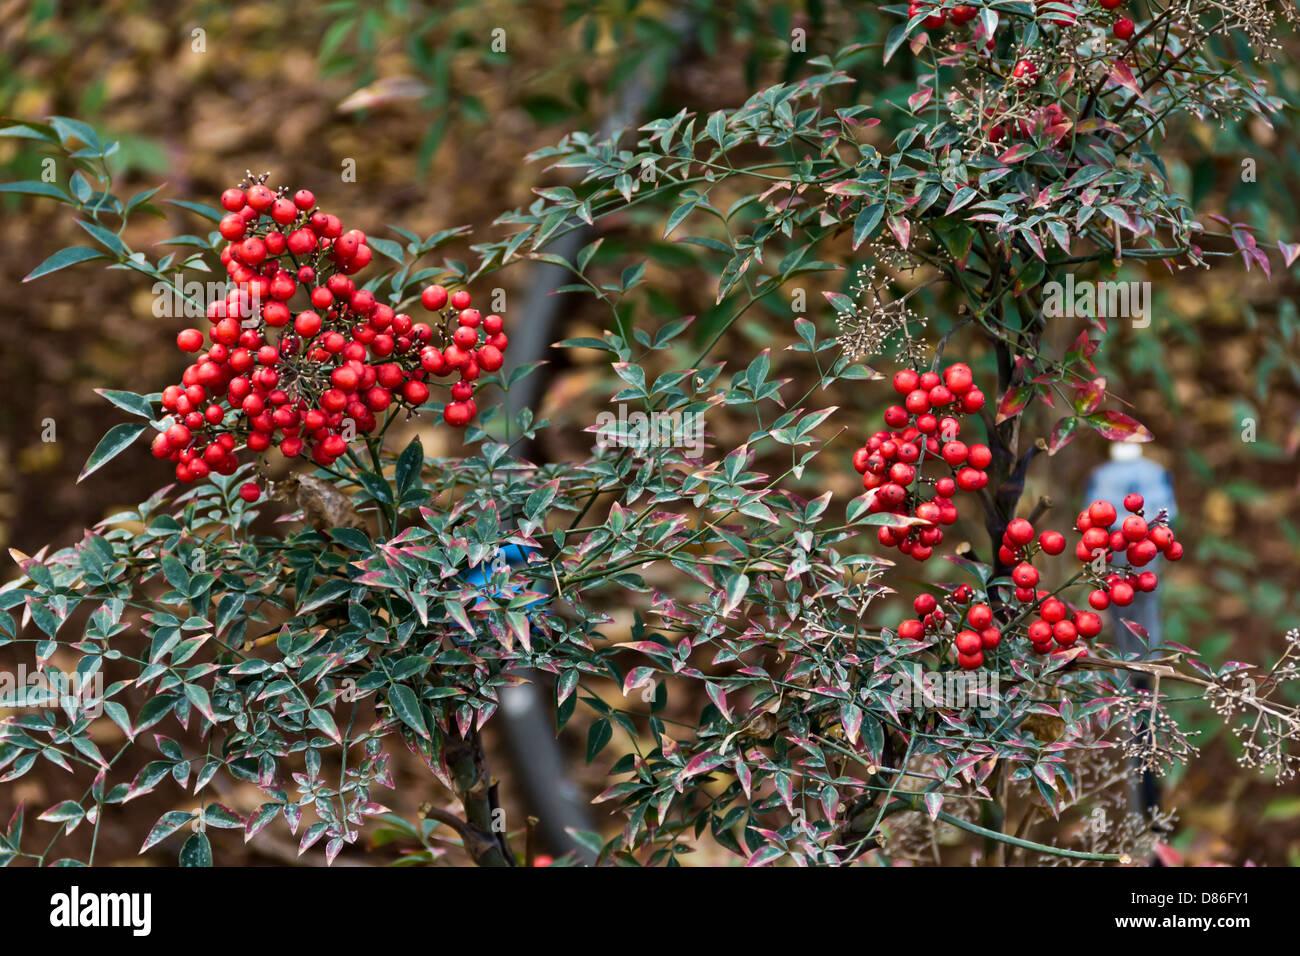 Cotoneaster shrub with red berries Stock Photo